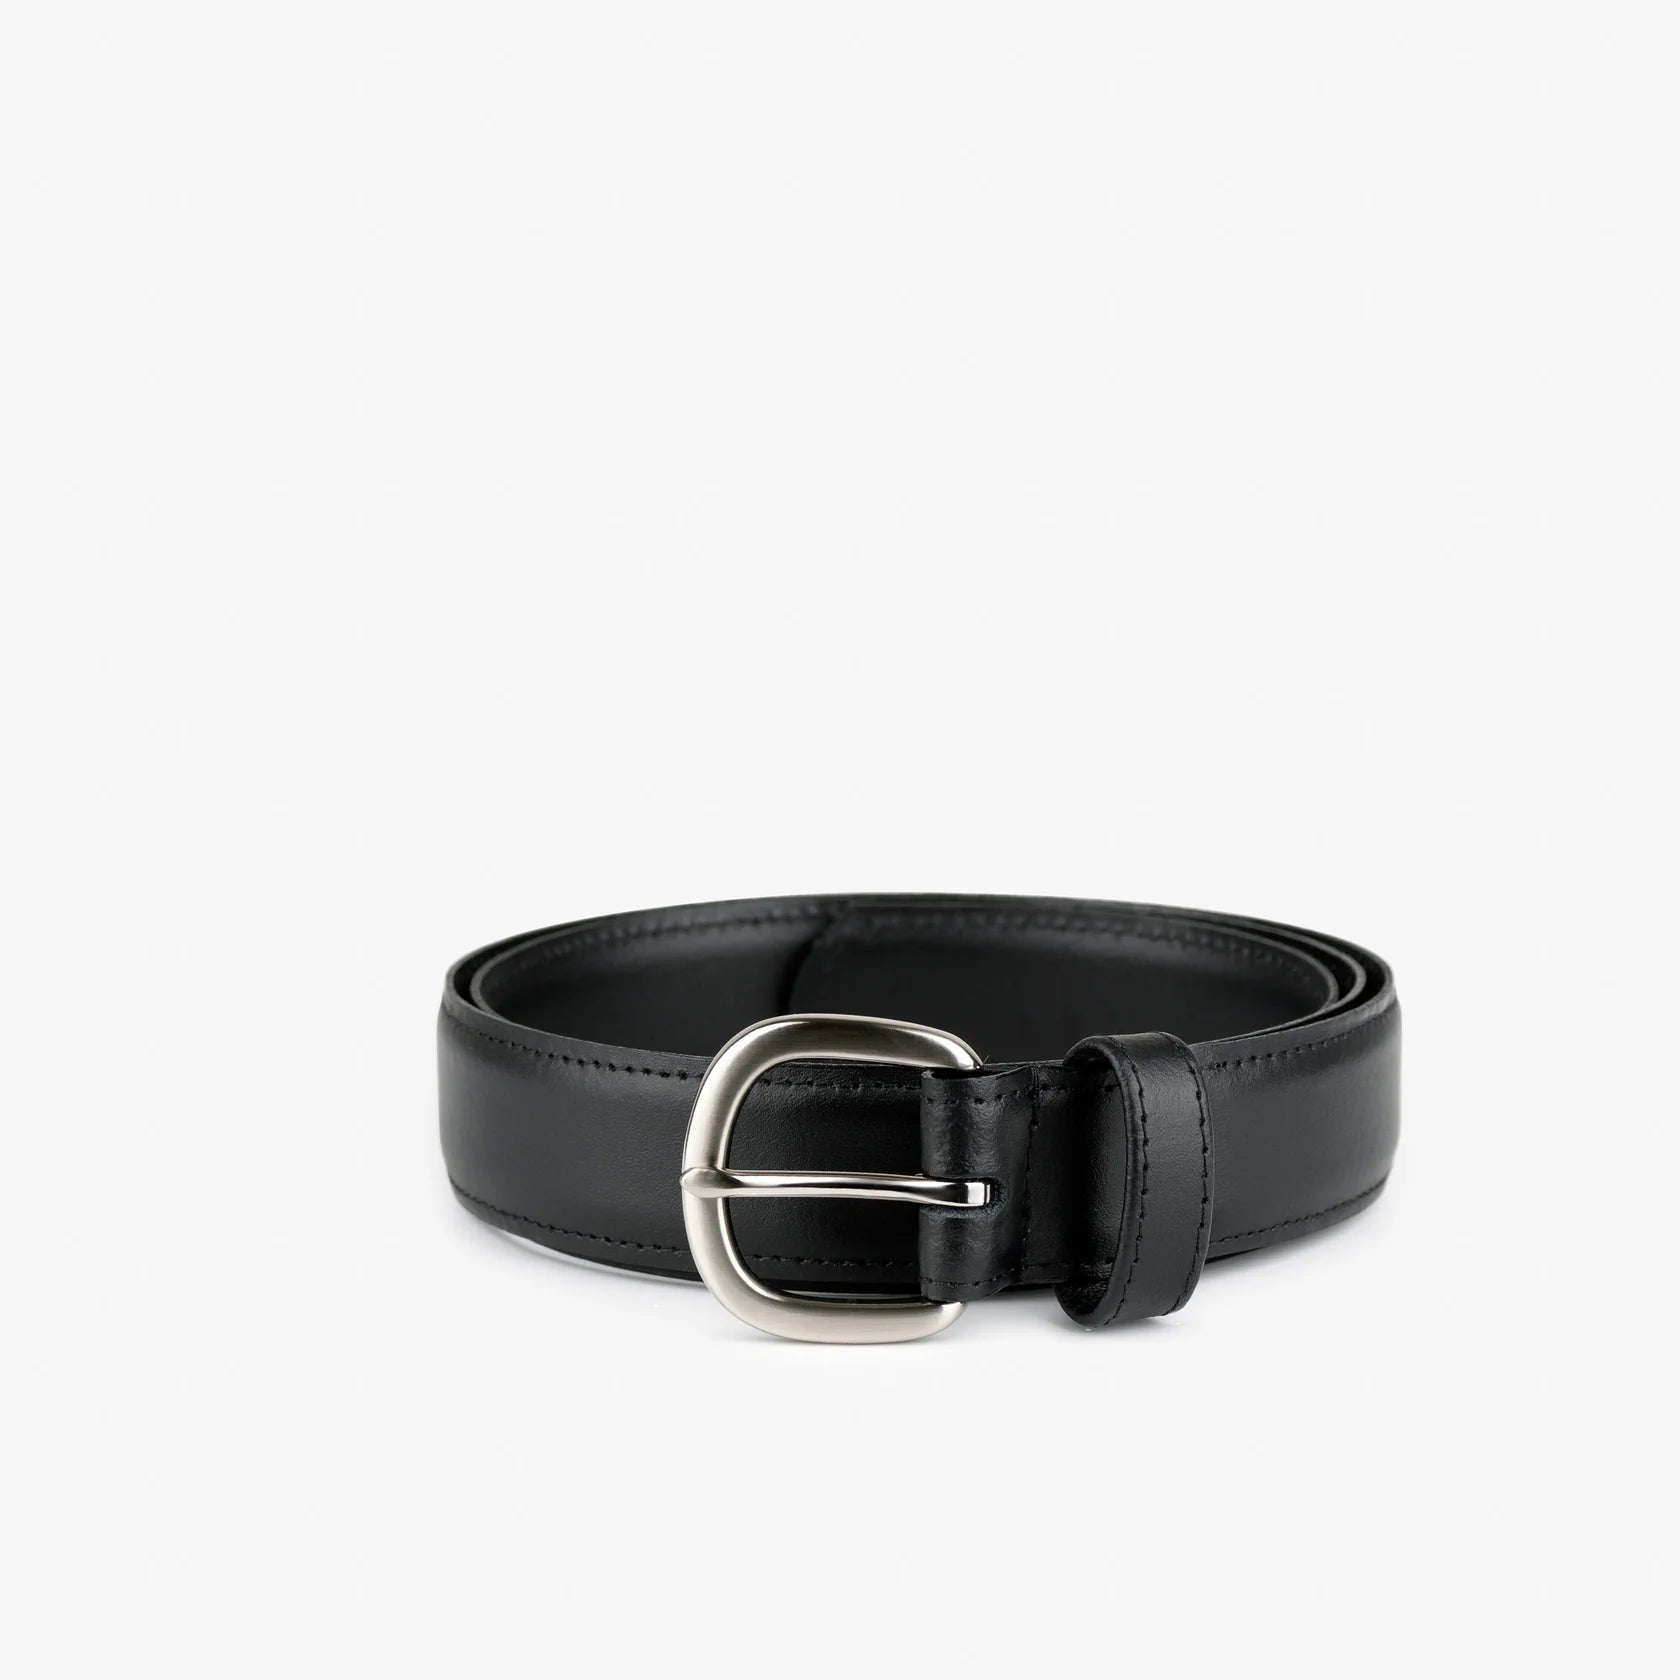 Milo & Dexter Classic Belt with round buckle in Black Fall 23/24